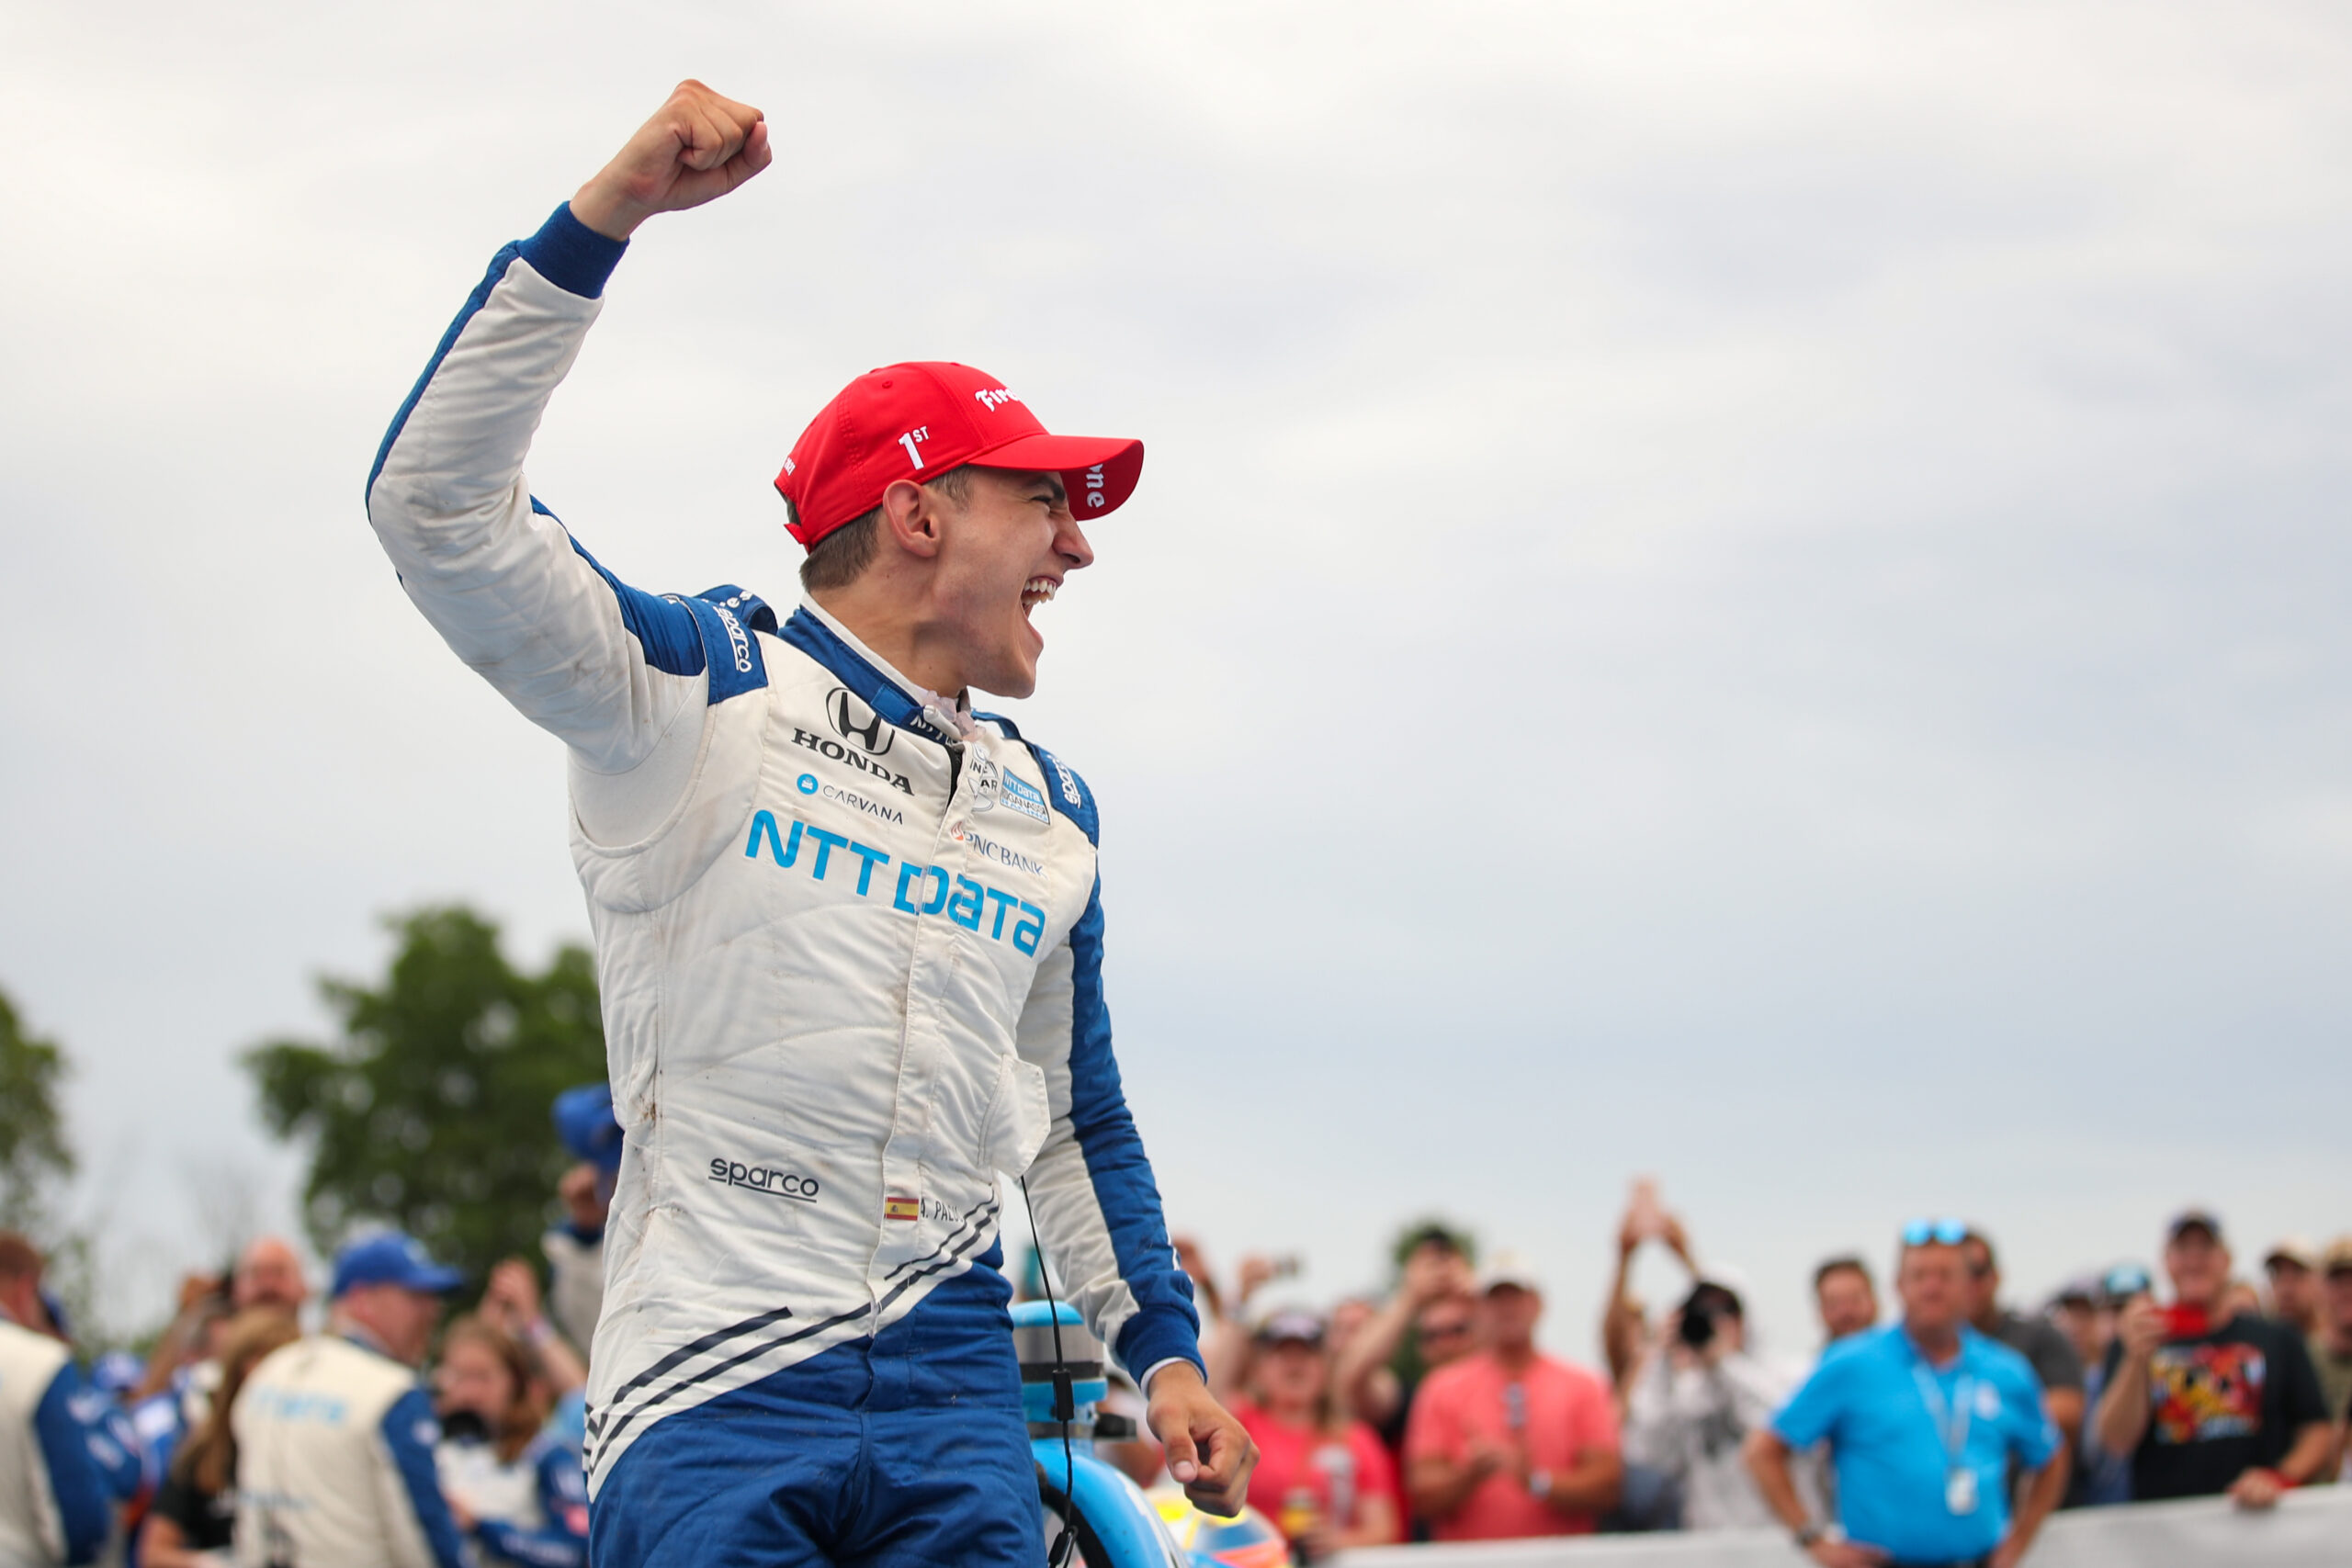 Alex Palou grabs victory away from Newgarden after Newgarden has mechanical failure late